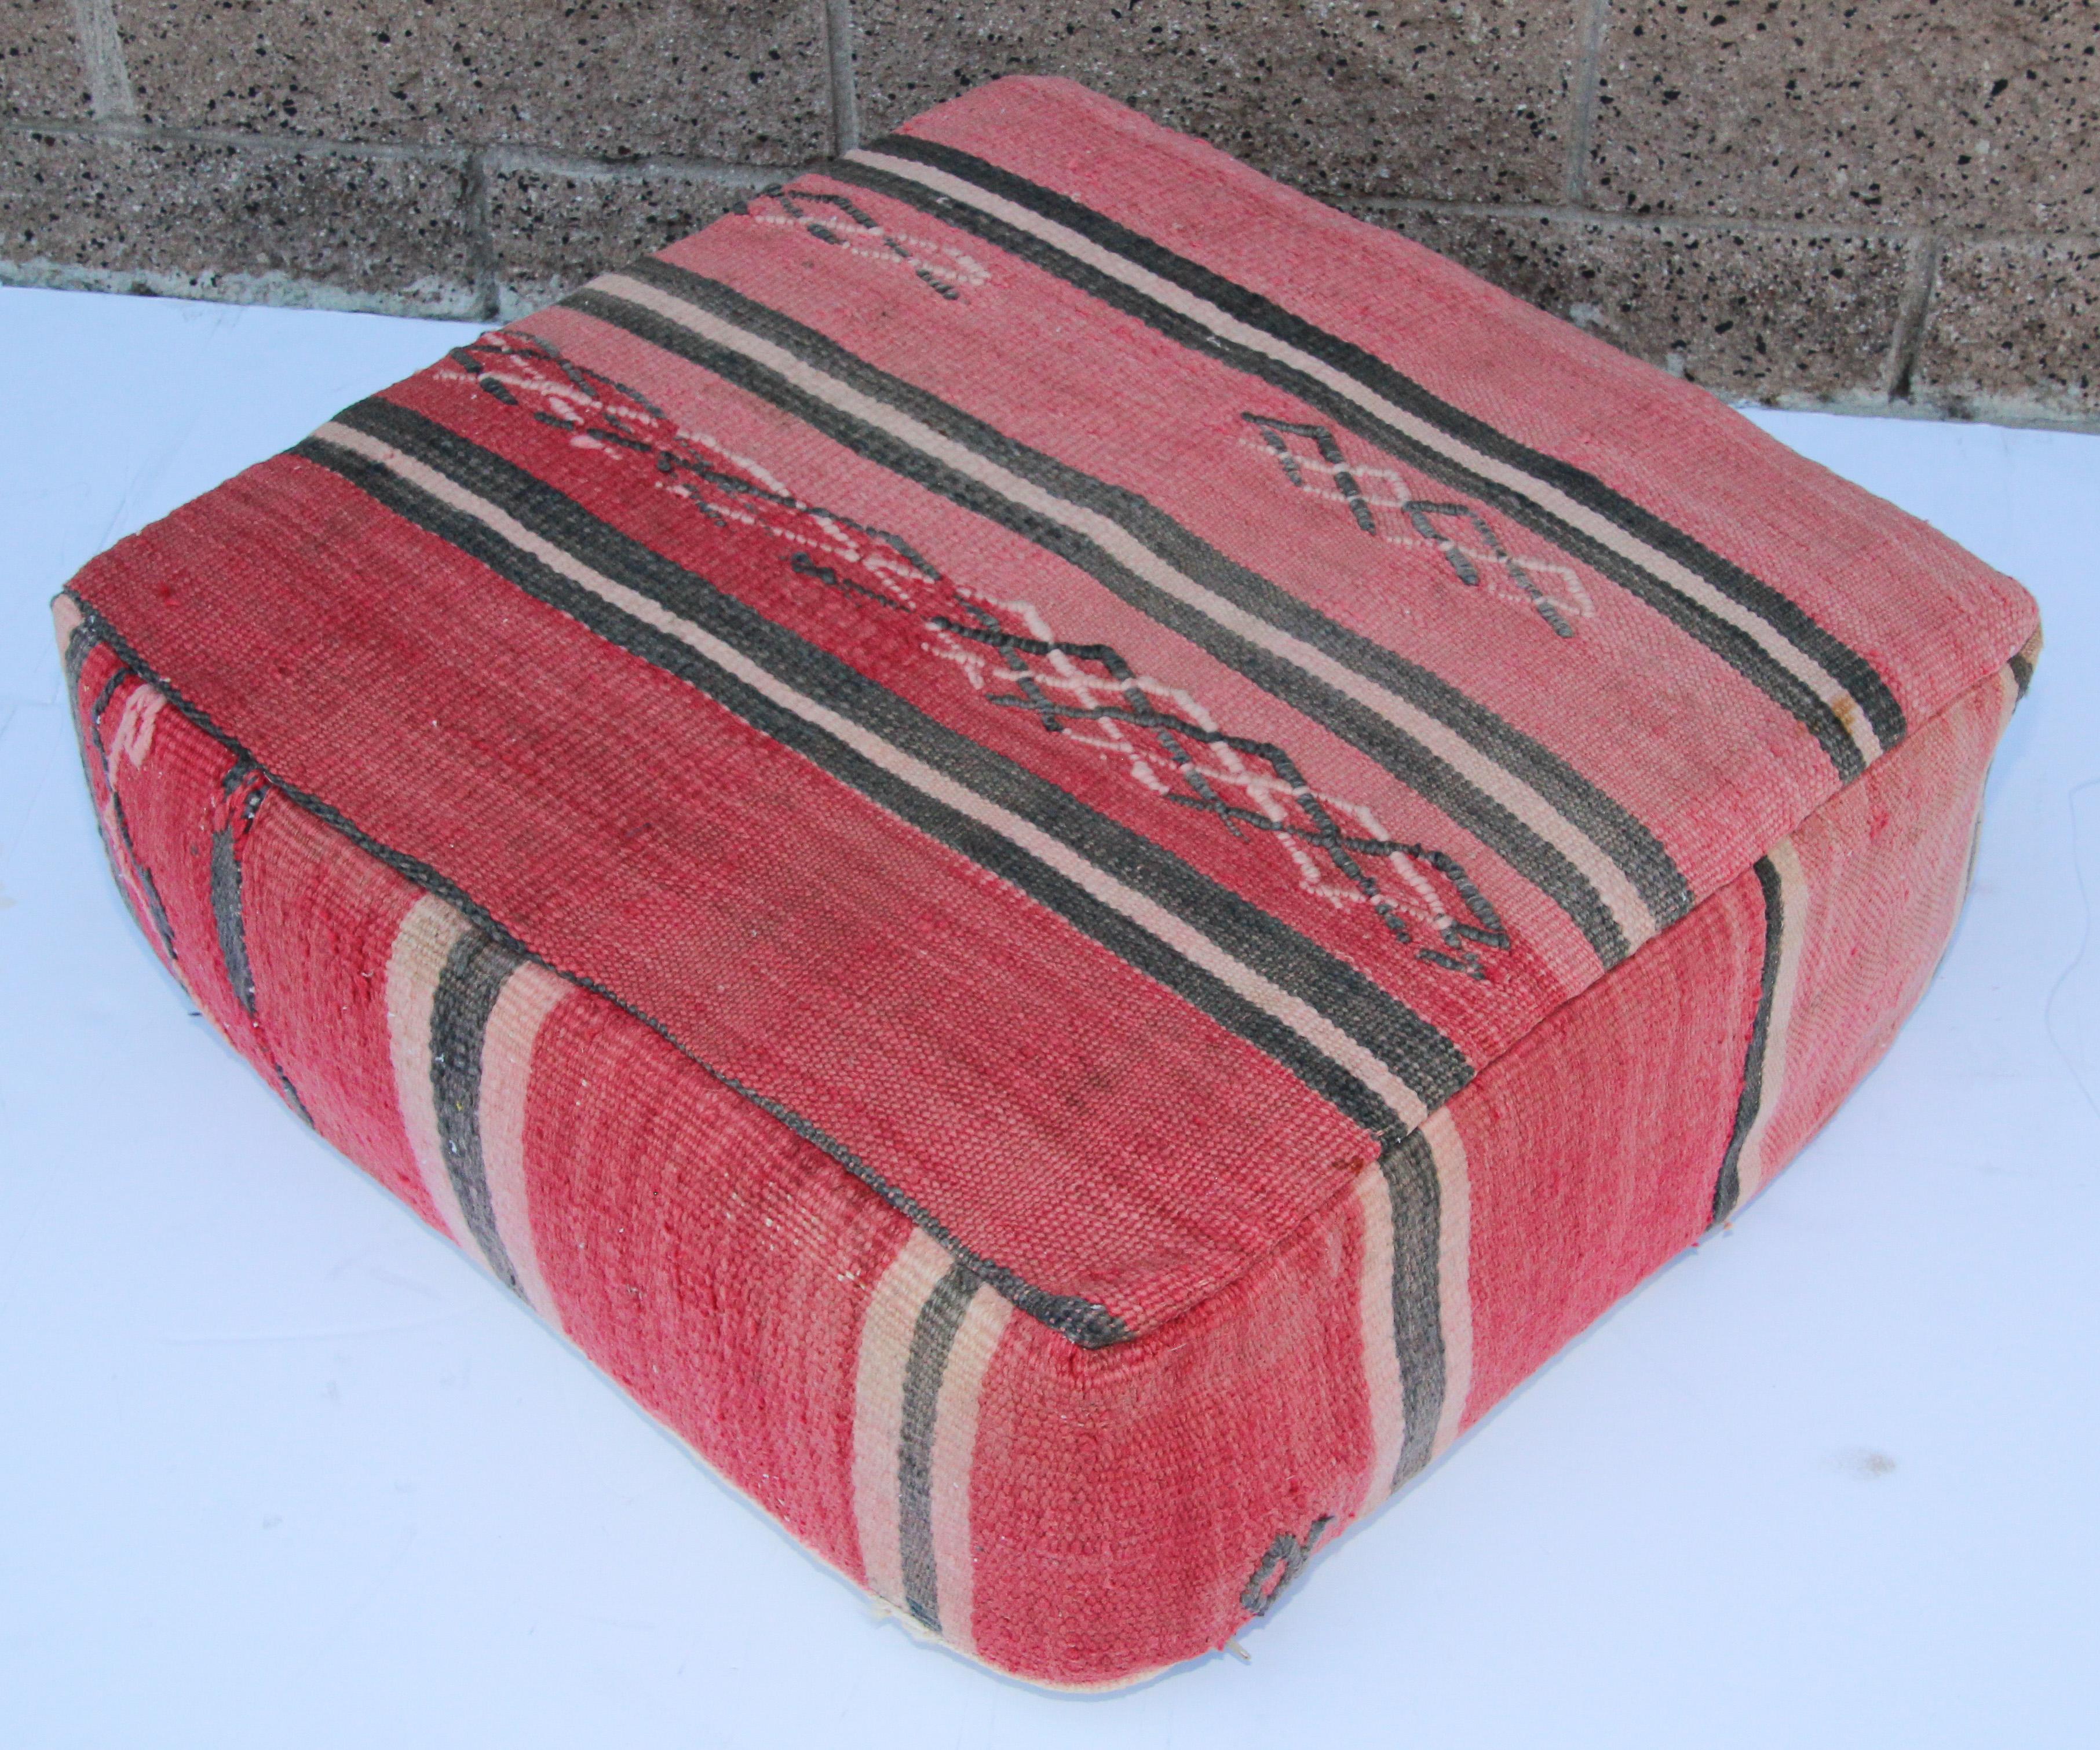 Moroccan vintage floor pillow seat cushion made from a Tribal Berber rug.
Square shape with nice faded earth tone colors for the top and rich warm stripes colors for the bottom.
Great addition for any Bohemian or modern interior.
Made from a vintage